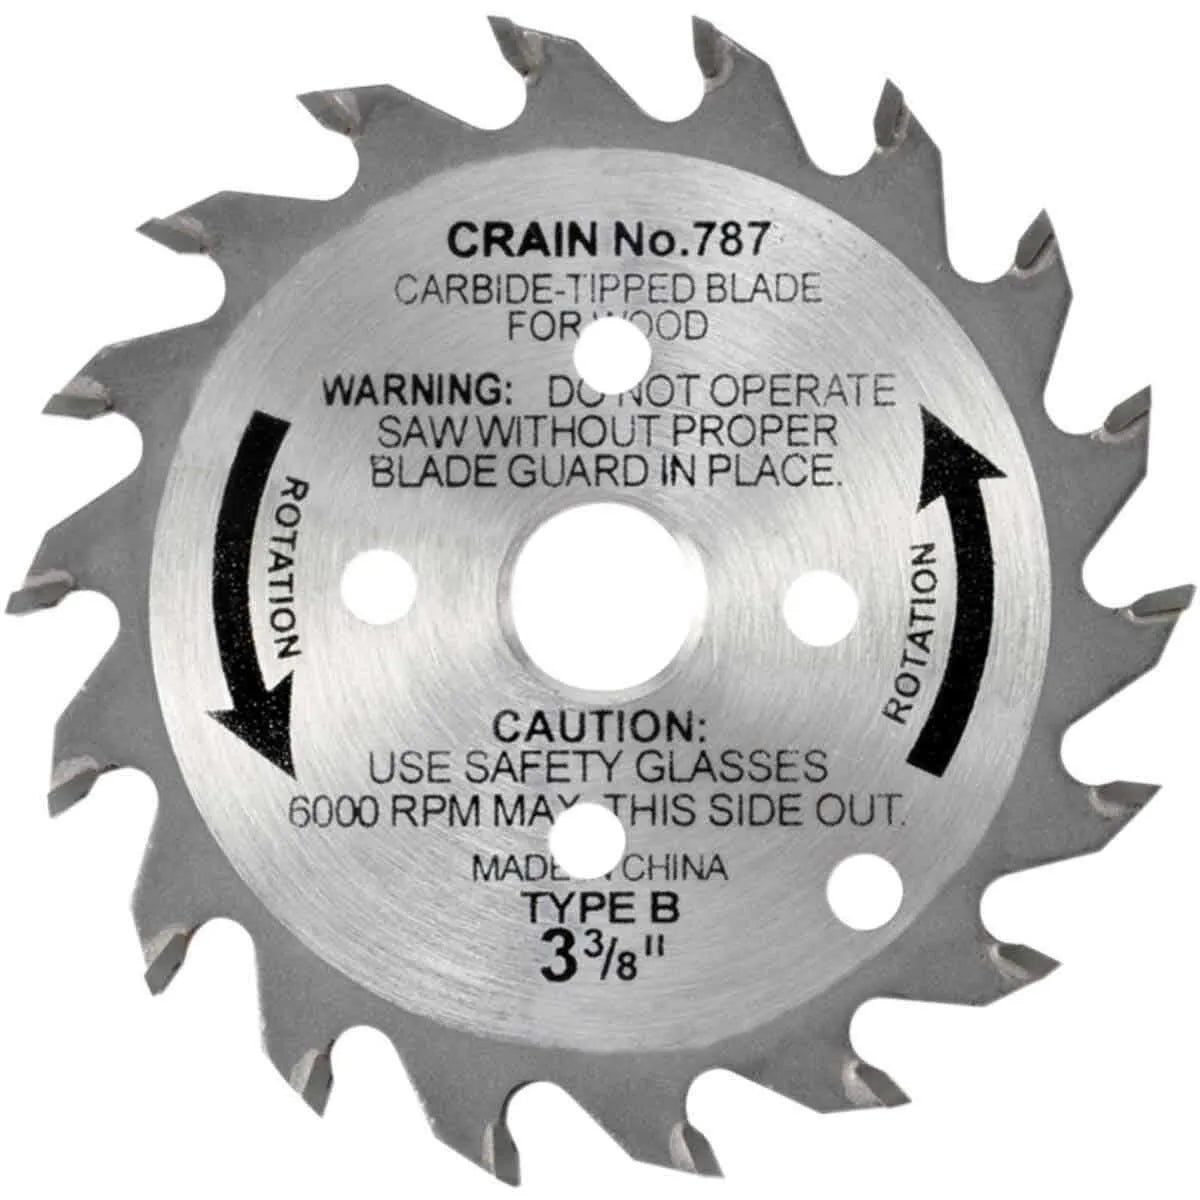 Crain 3-3/8" Carbide Tipped Replacement Blade